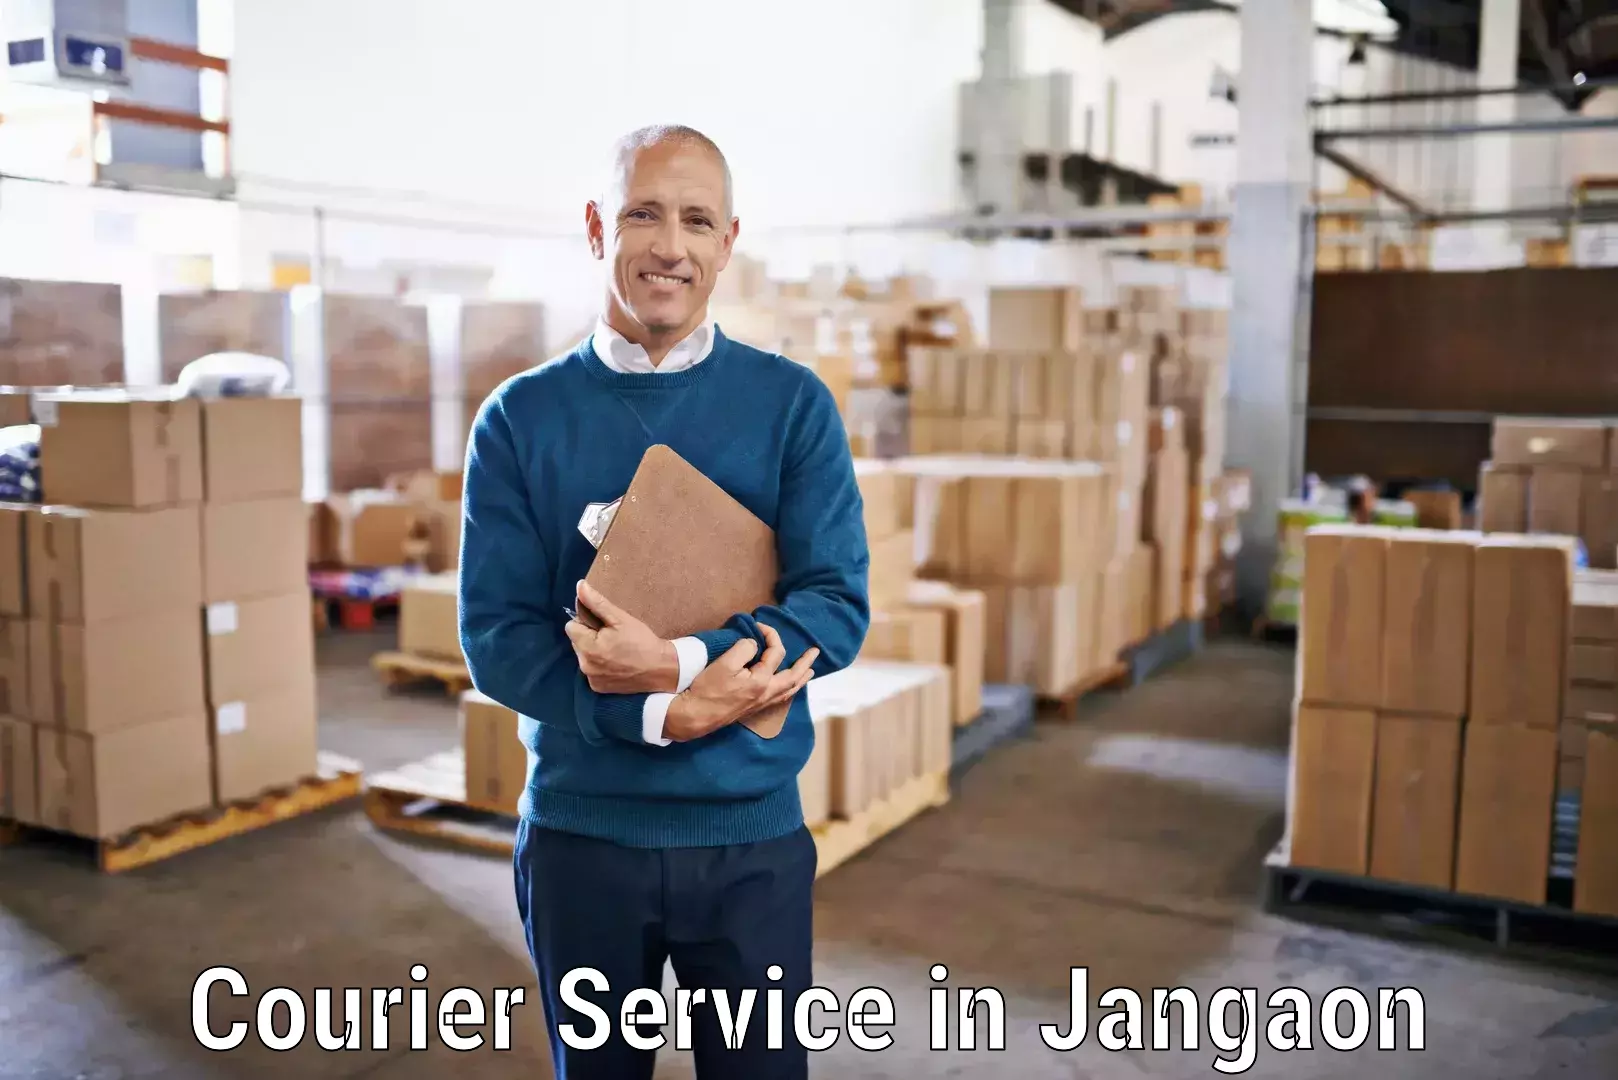 Cargo delivery service in Jangaon